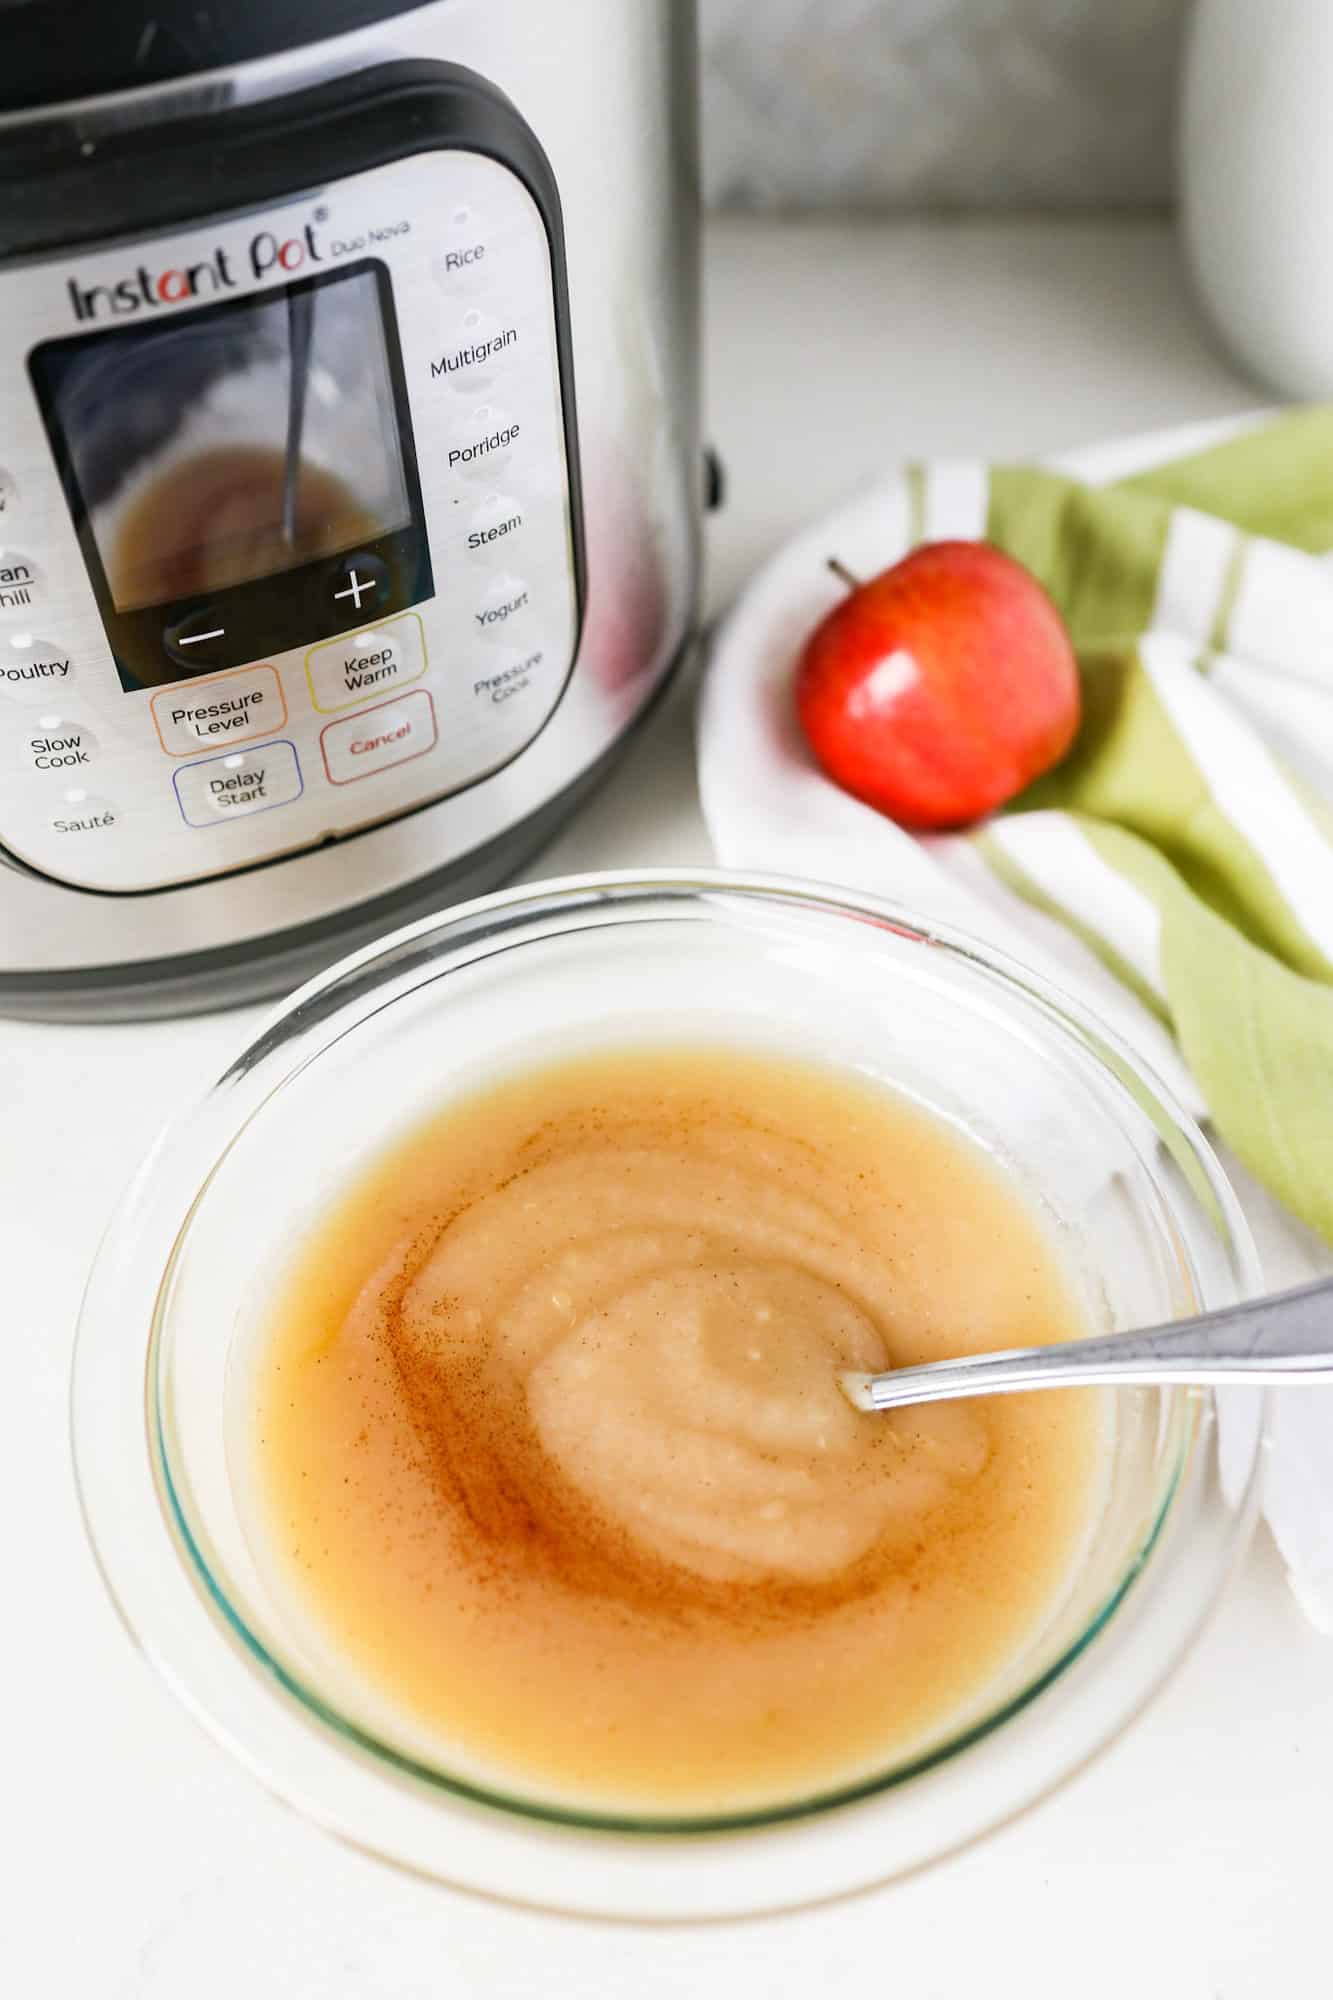 Applesauce with cinnamon sprinkled on top sitting beside an instant pot